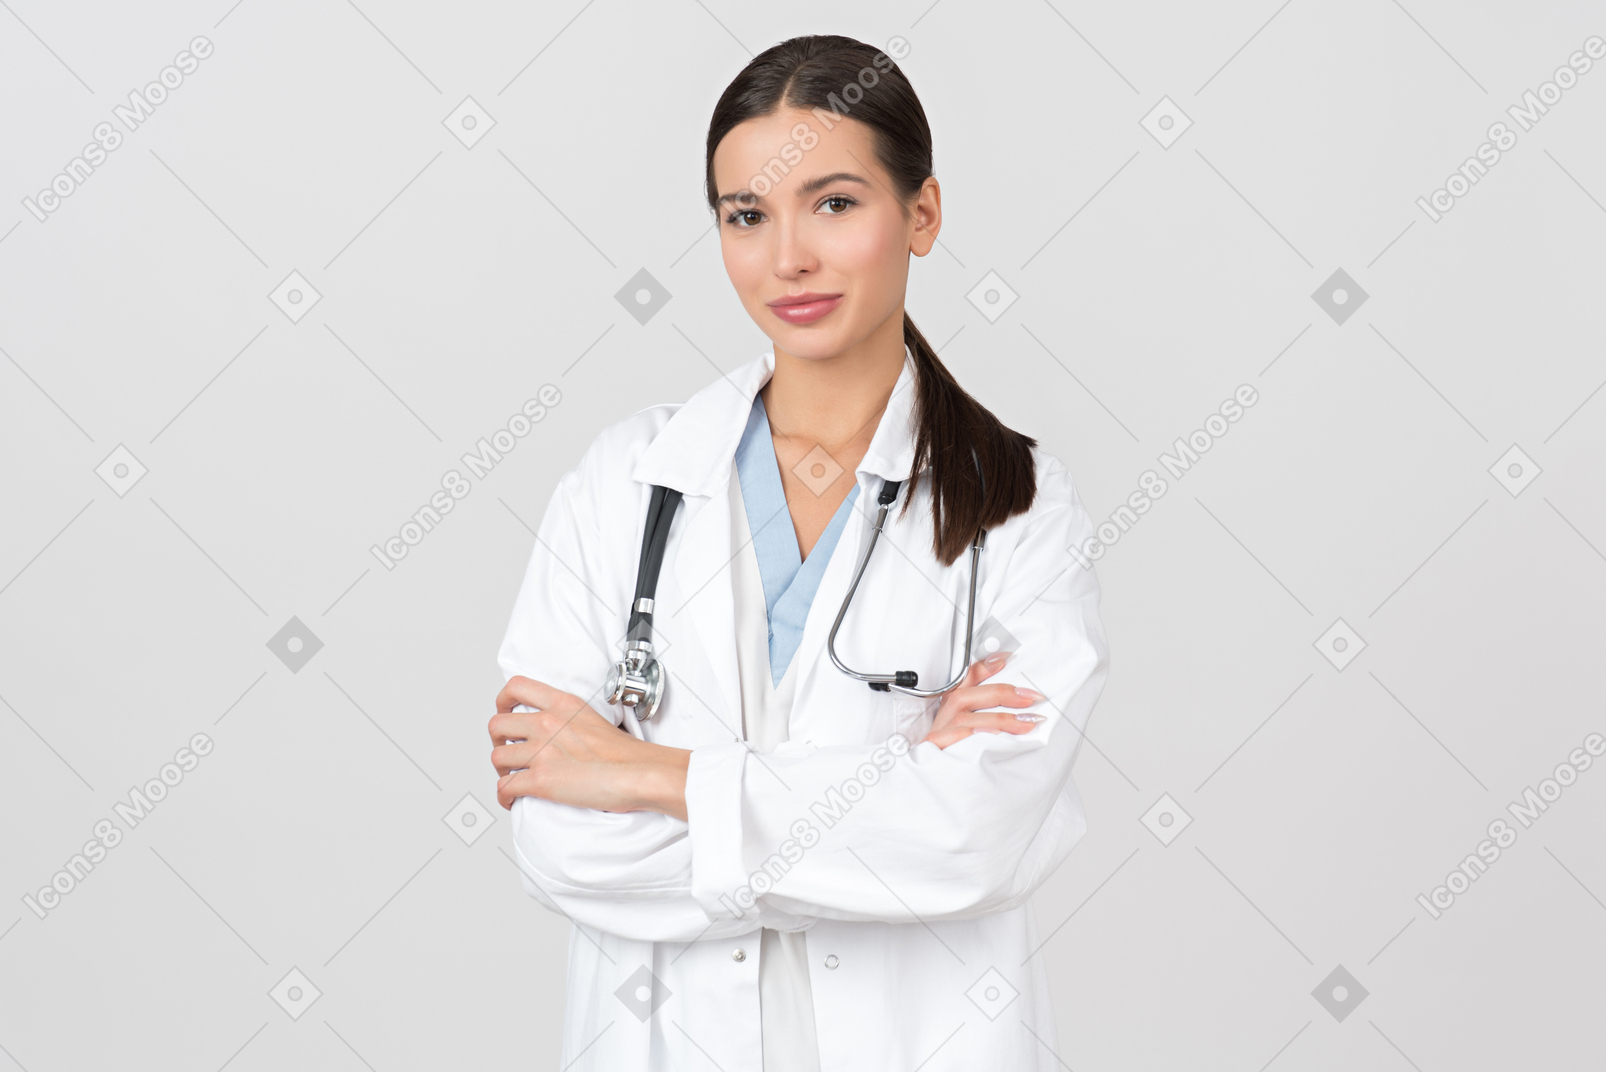 Doctor's work requires serious feeling and a lot of efforts